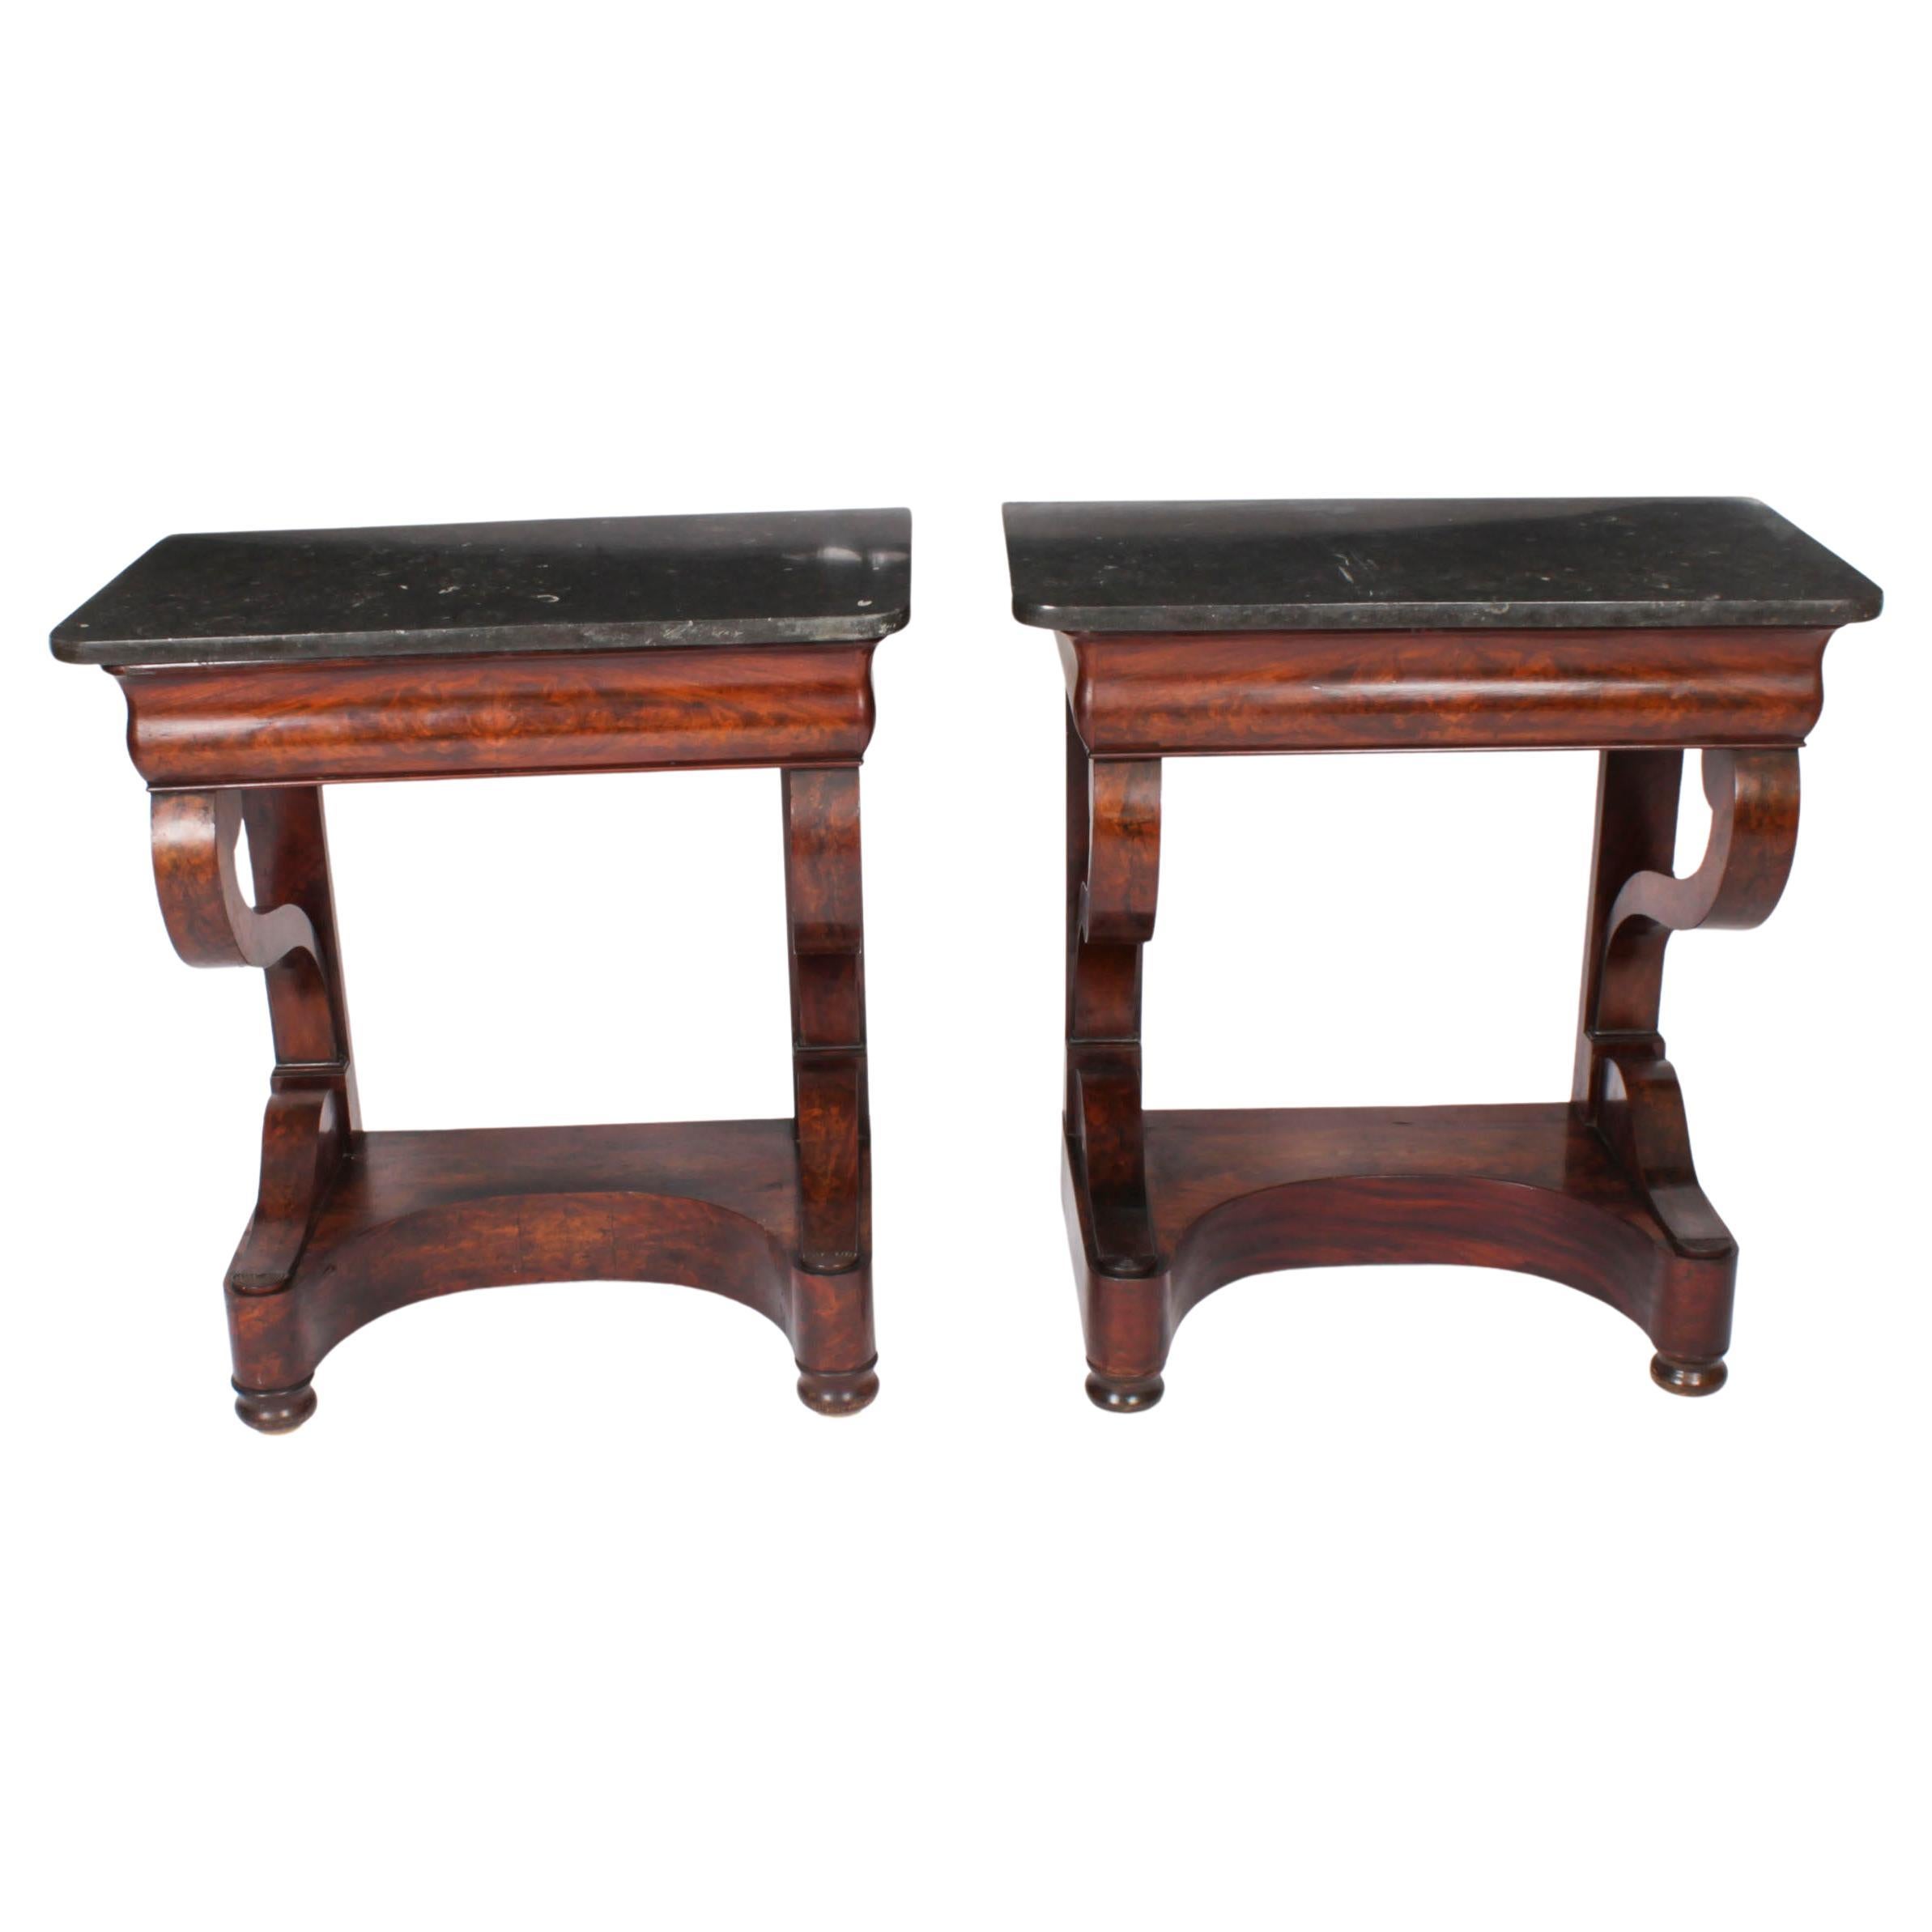 Antique Pair French Empire Marble Top Console Tables Circa 1840 19th Century